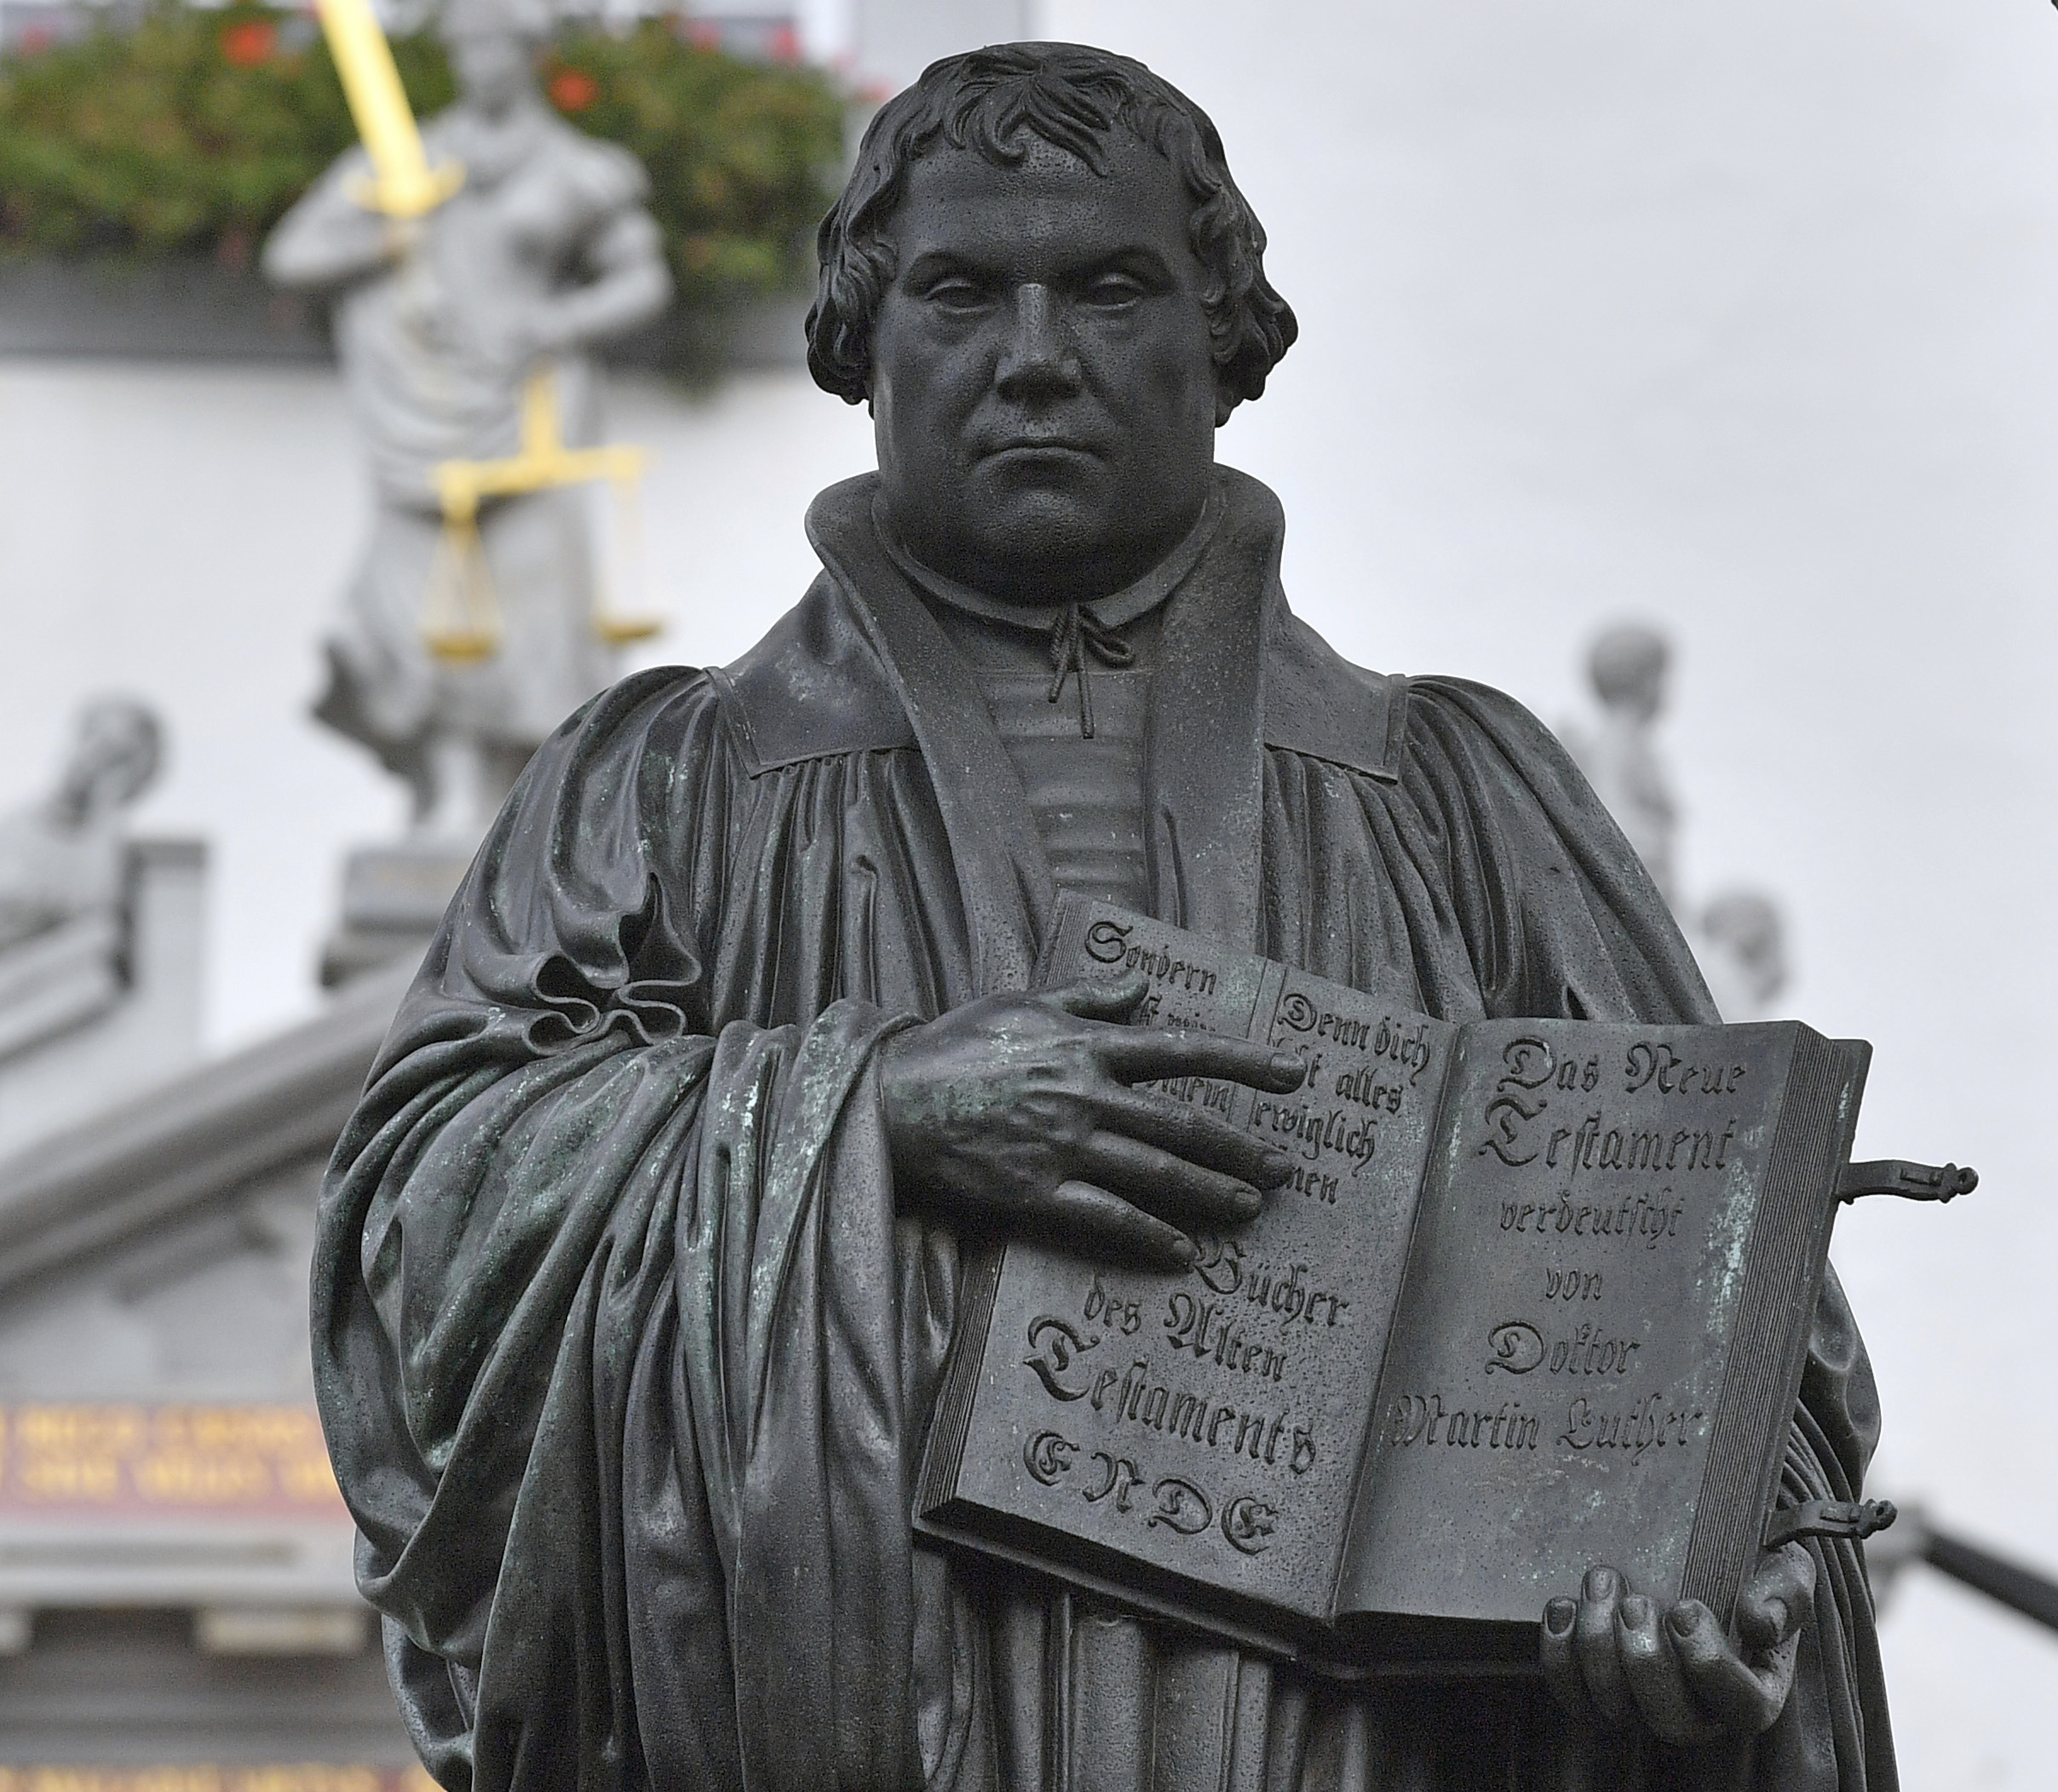 The Martin Luther memorial can be seen on the market square in Wittenberg, Germany, Tuesday, Oct. 31, 2017. German leaders will mark the 500th anniversary of the day Martin Luther is said to have nailed his theses challenging the Catholic Church's practice of selling indulgences to a church door, a starting point of the Reformation.   (Hendrik Schmidt/dpa via AP)